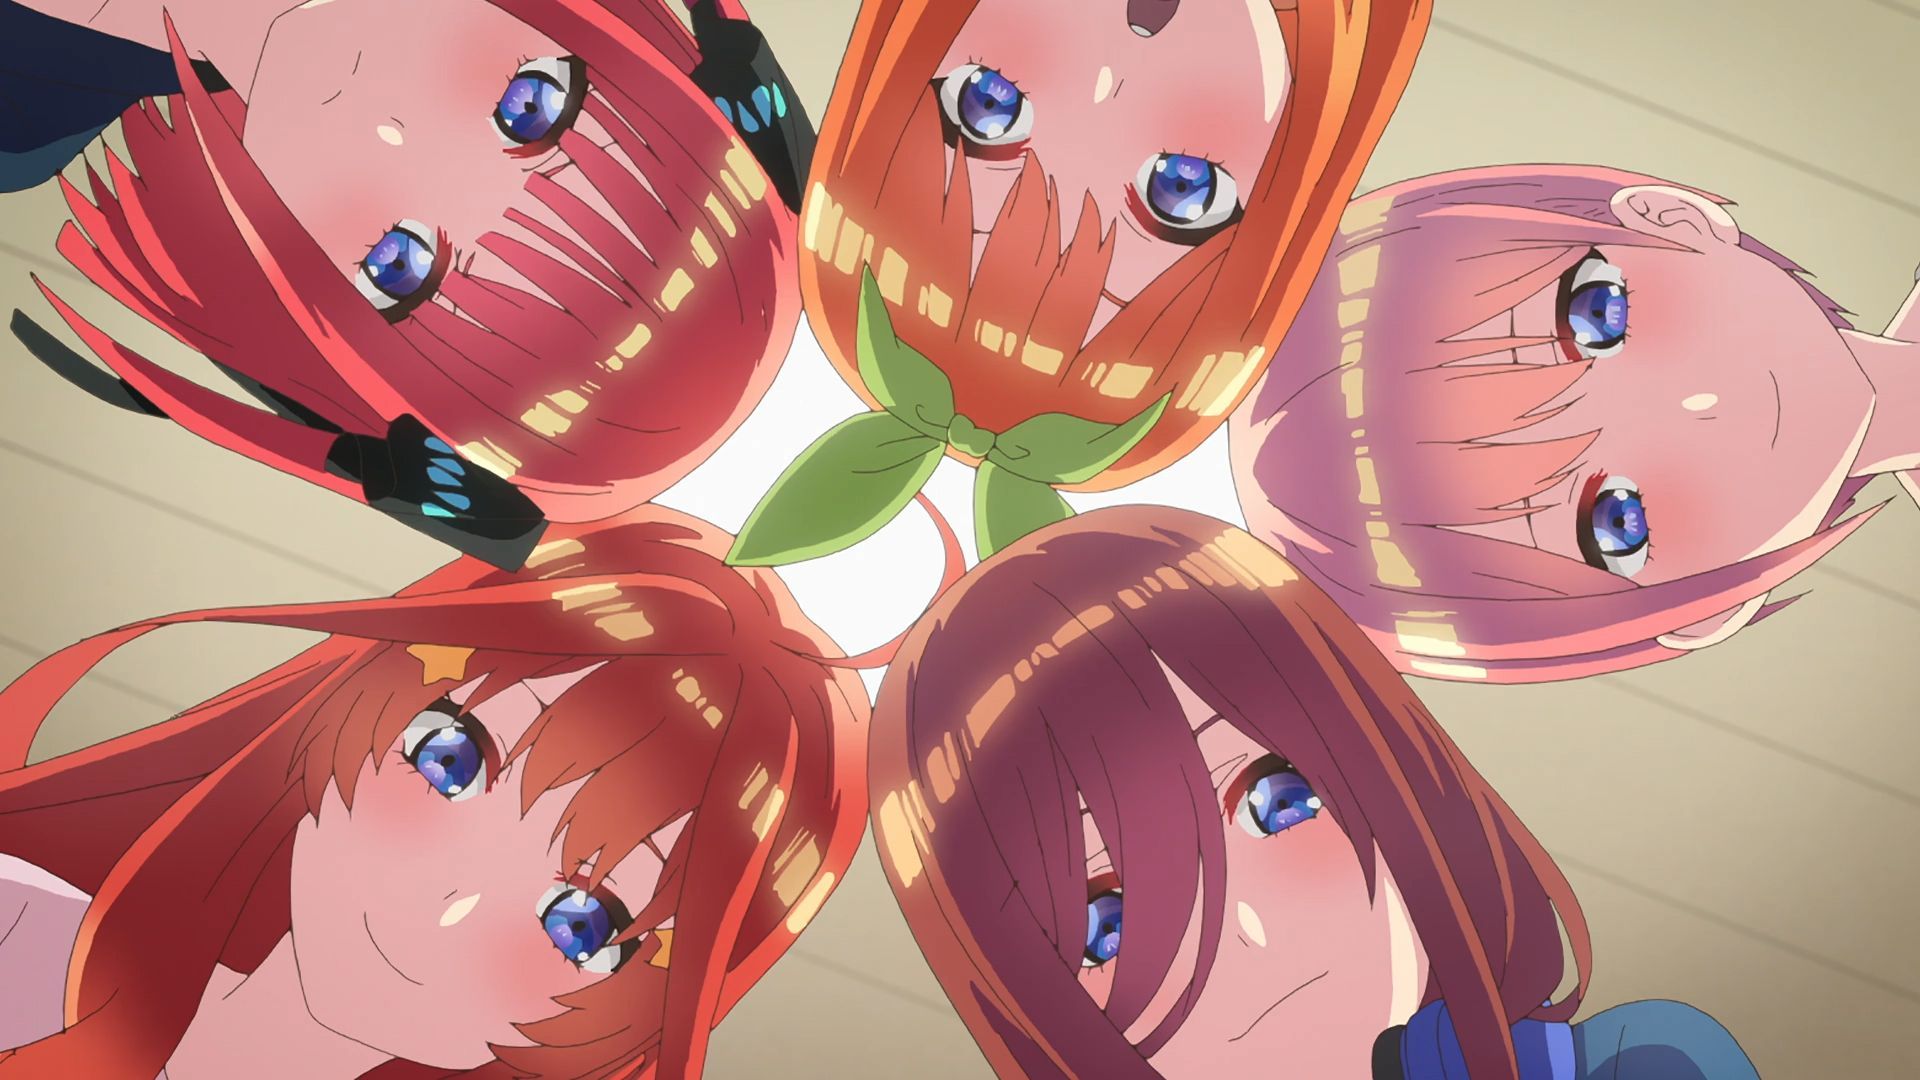 Go-Toubun no Hanayome - Go-Toubun no Hanayome (The Quintessential  Quintuplets) Season 2 - Episode 9 [Screenshots] Flying kiss by our second  sister, Nakano Nino. Once again, she's making her way to Futarou-kyun ~